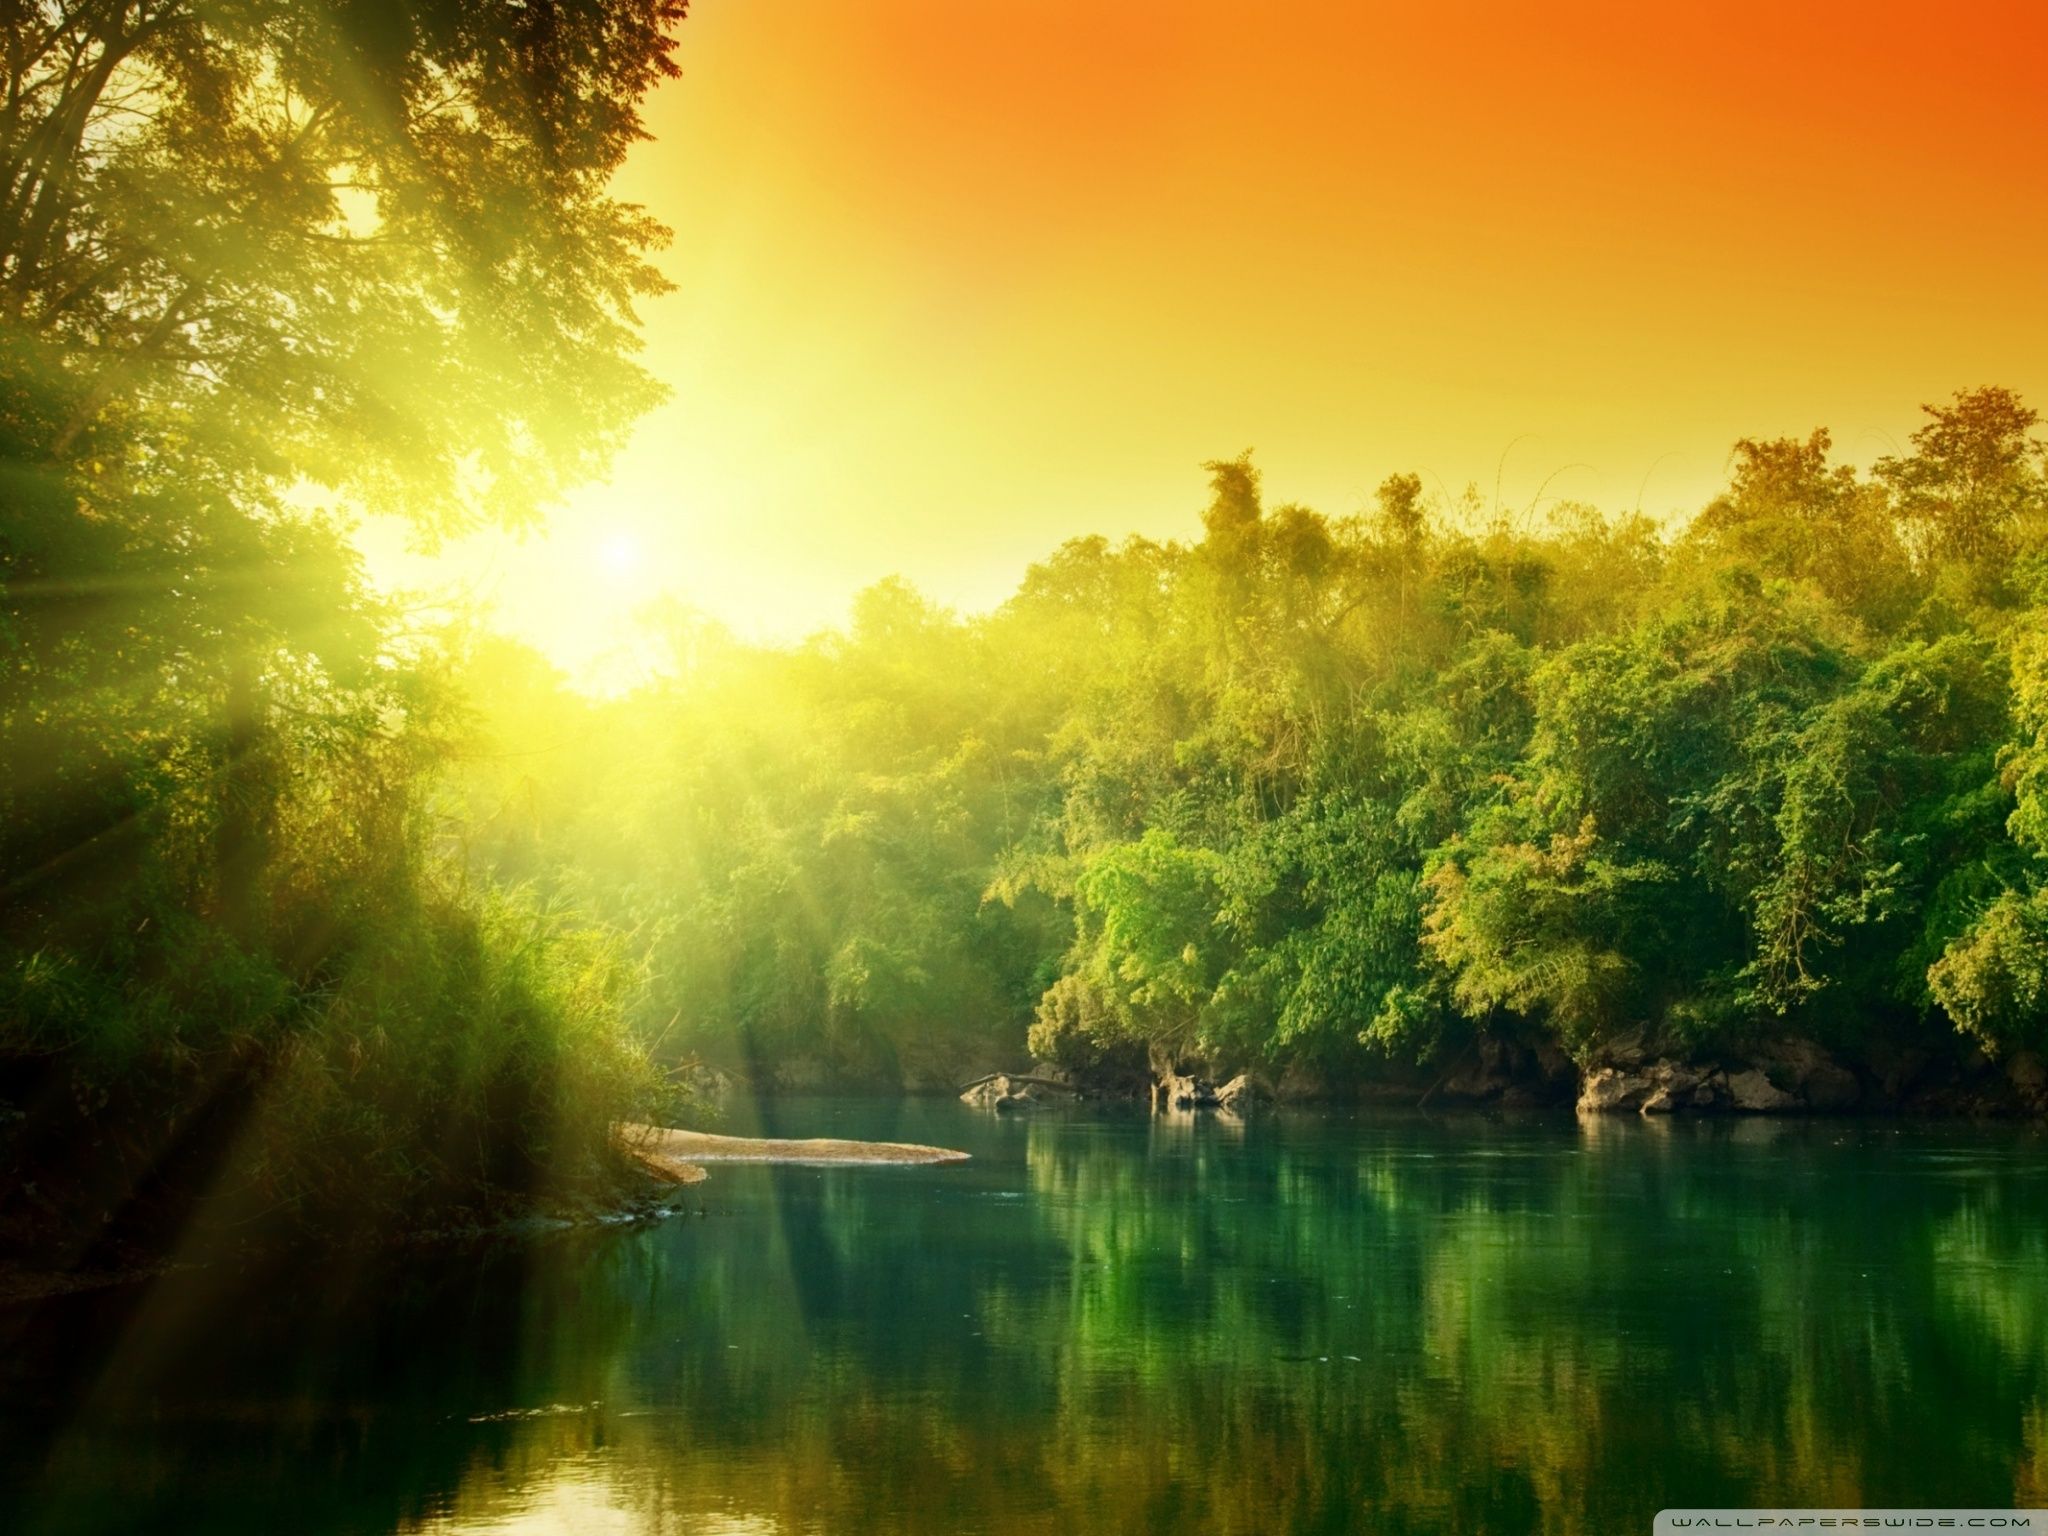 Lush Green Forest River At Sunrise Ultra HD Desktop Background Wallpaper for 4K UHD TV, Multi Display, Dual Monitor, Tablet